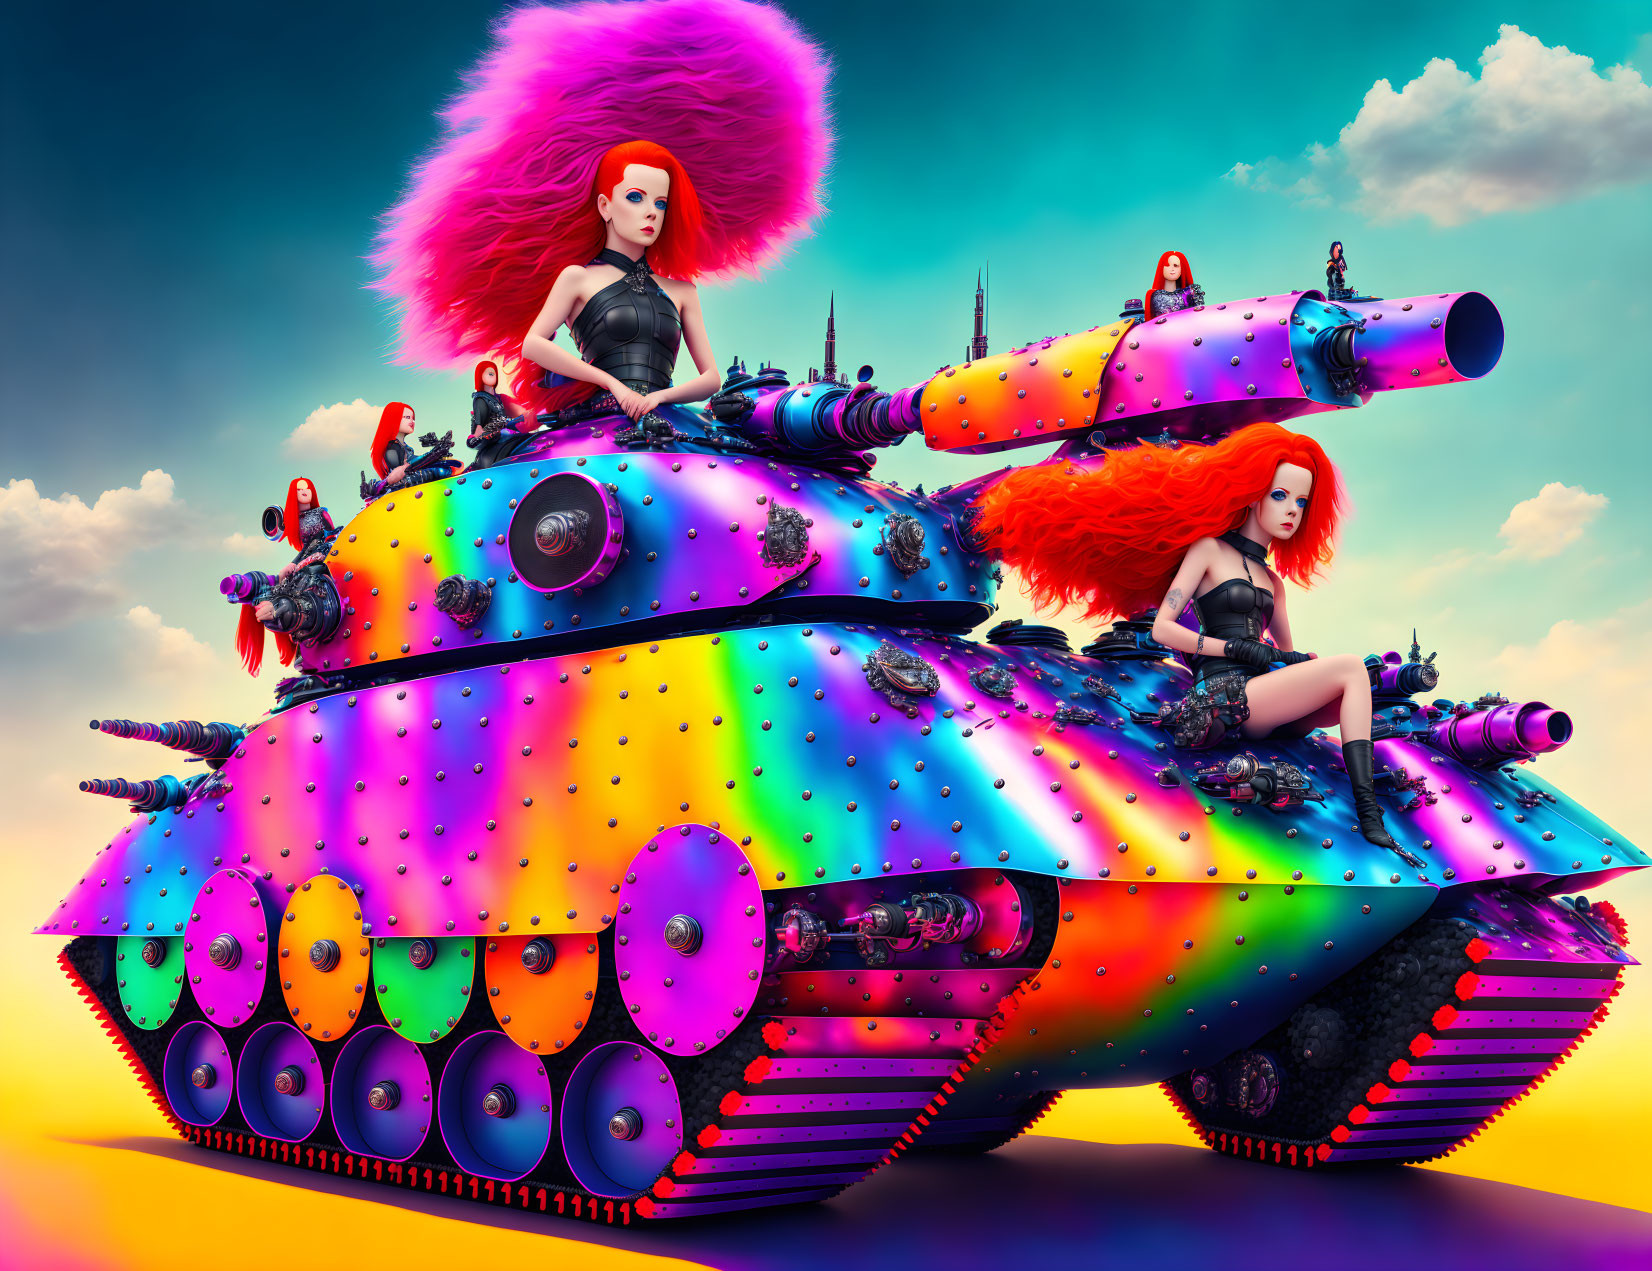 Colorful polka dot tank with stylized female figures and vibrant hair under dramatic sky